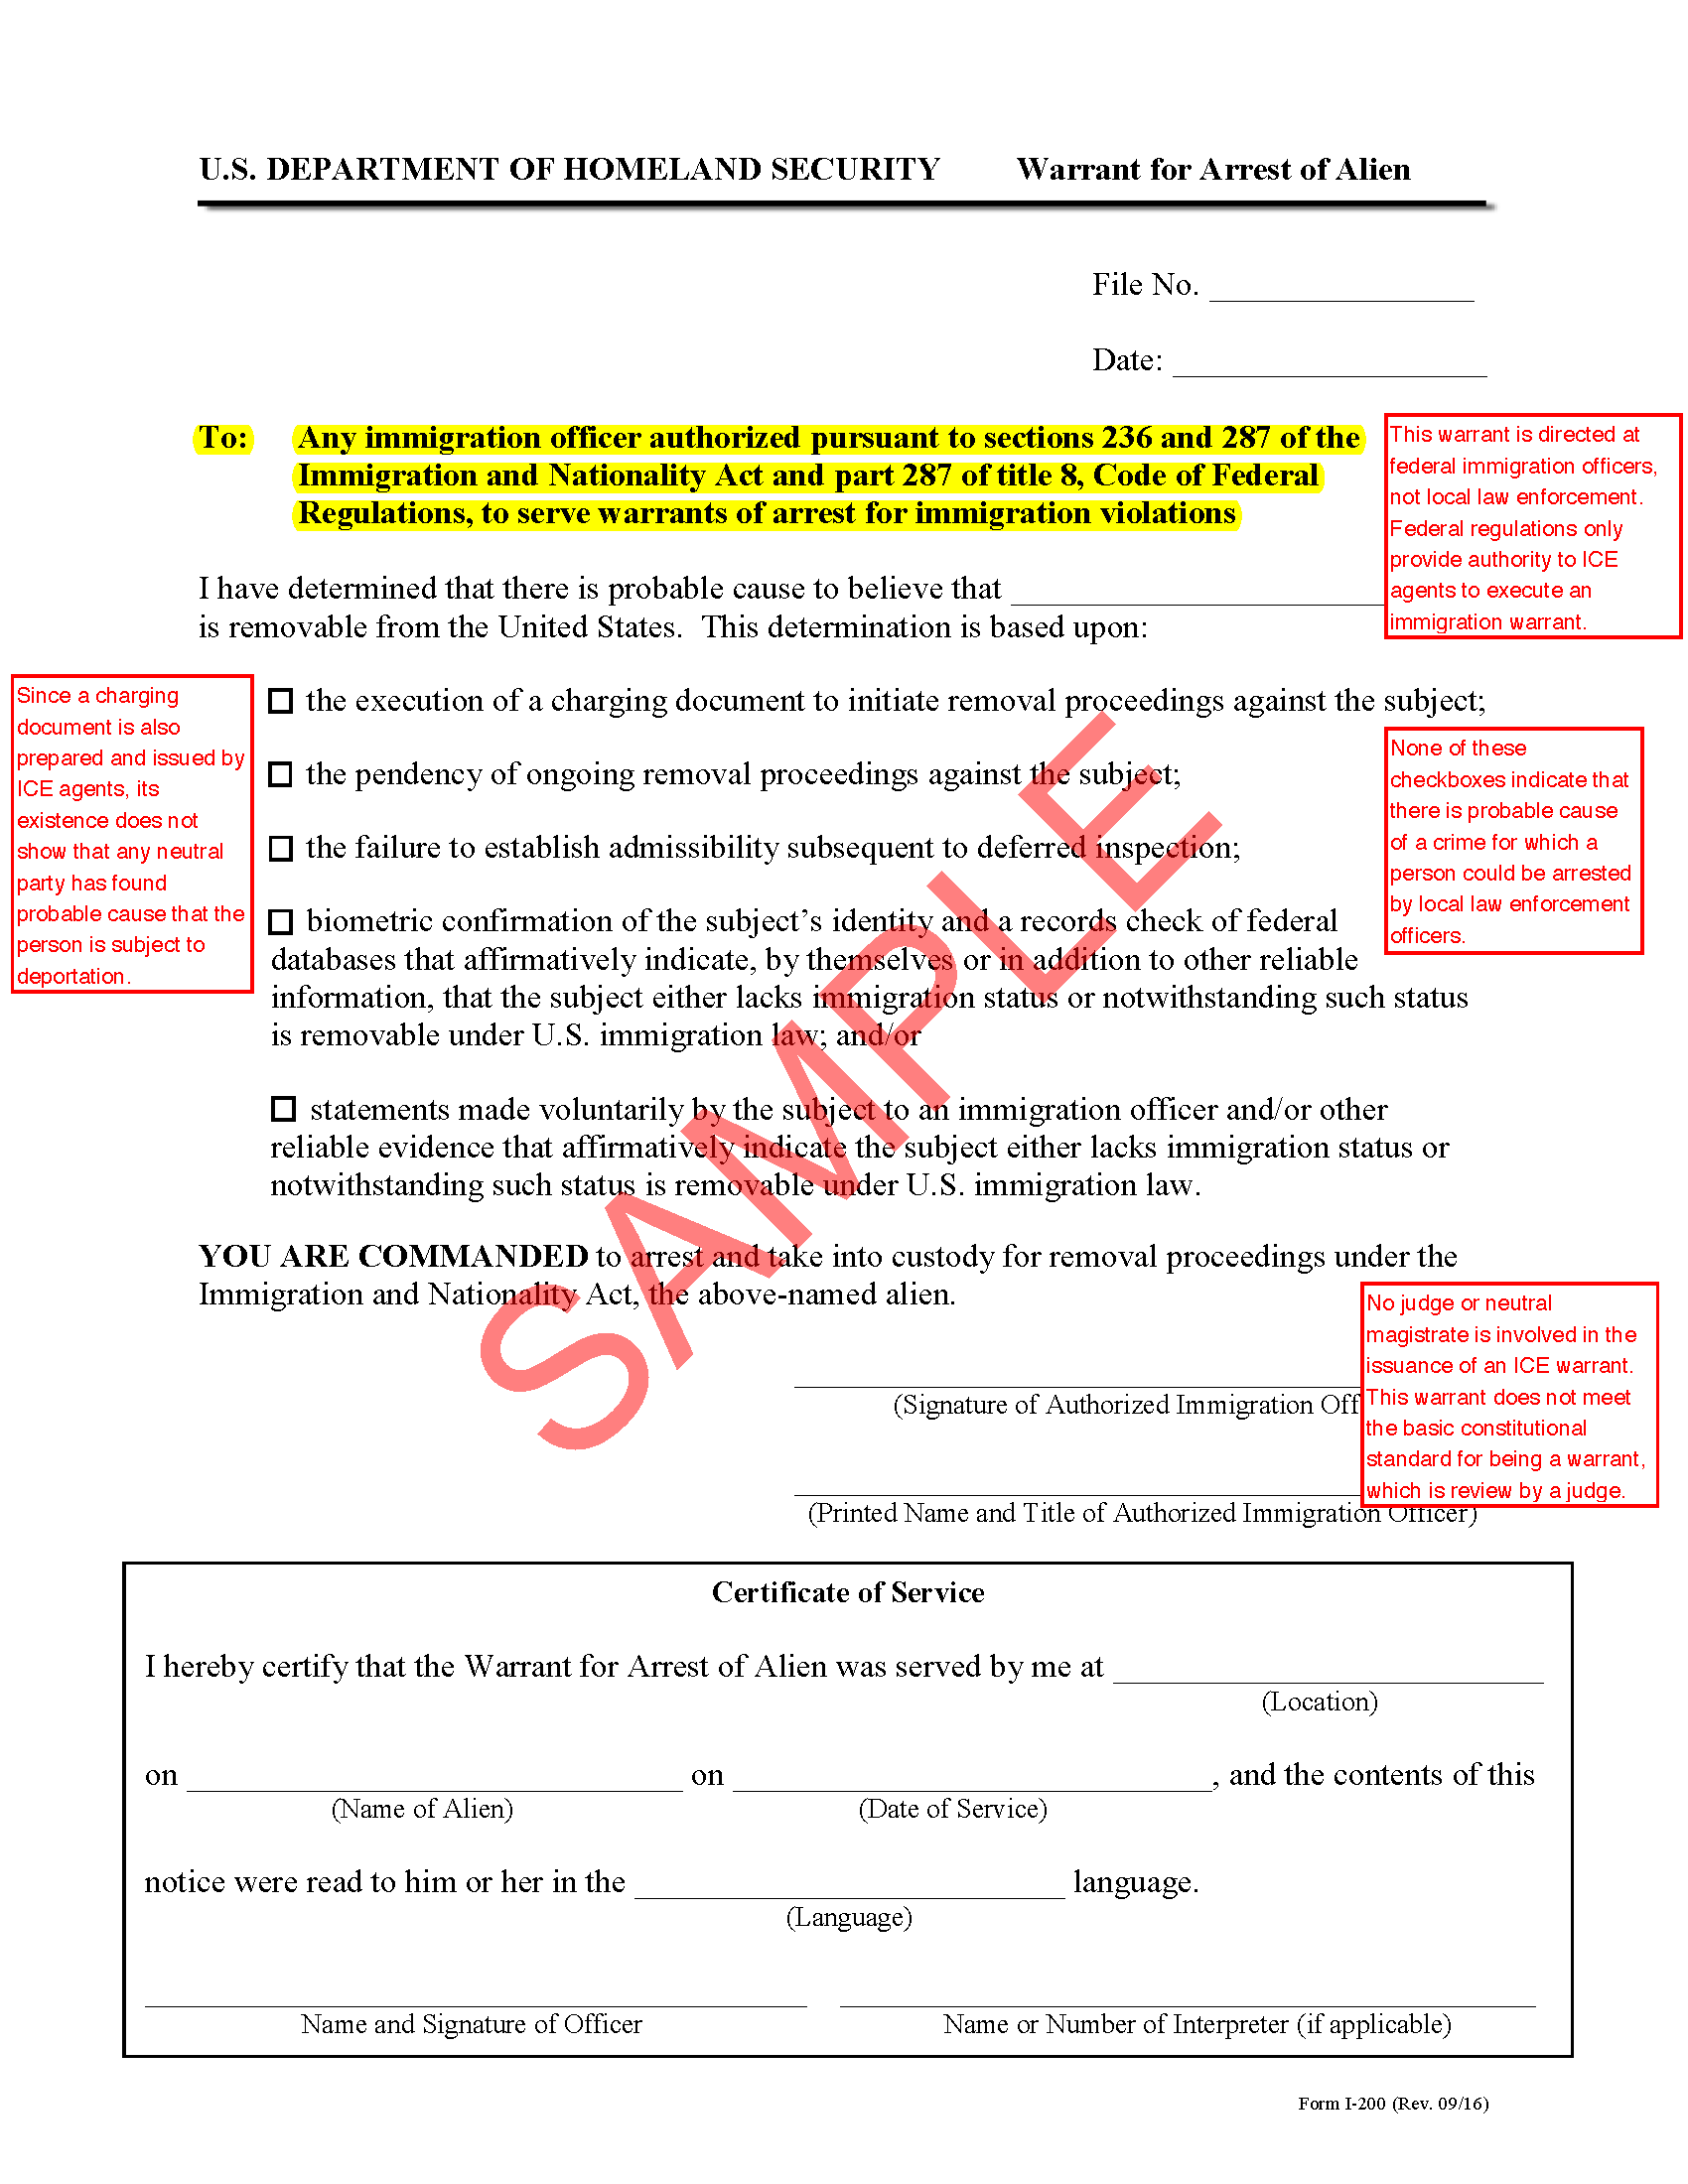 Annotated ICE Warrant